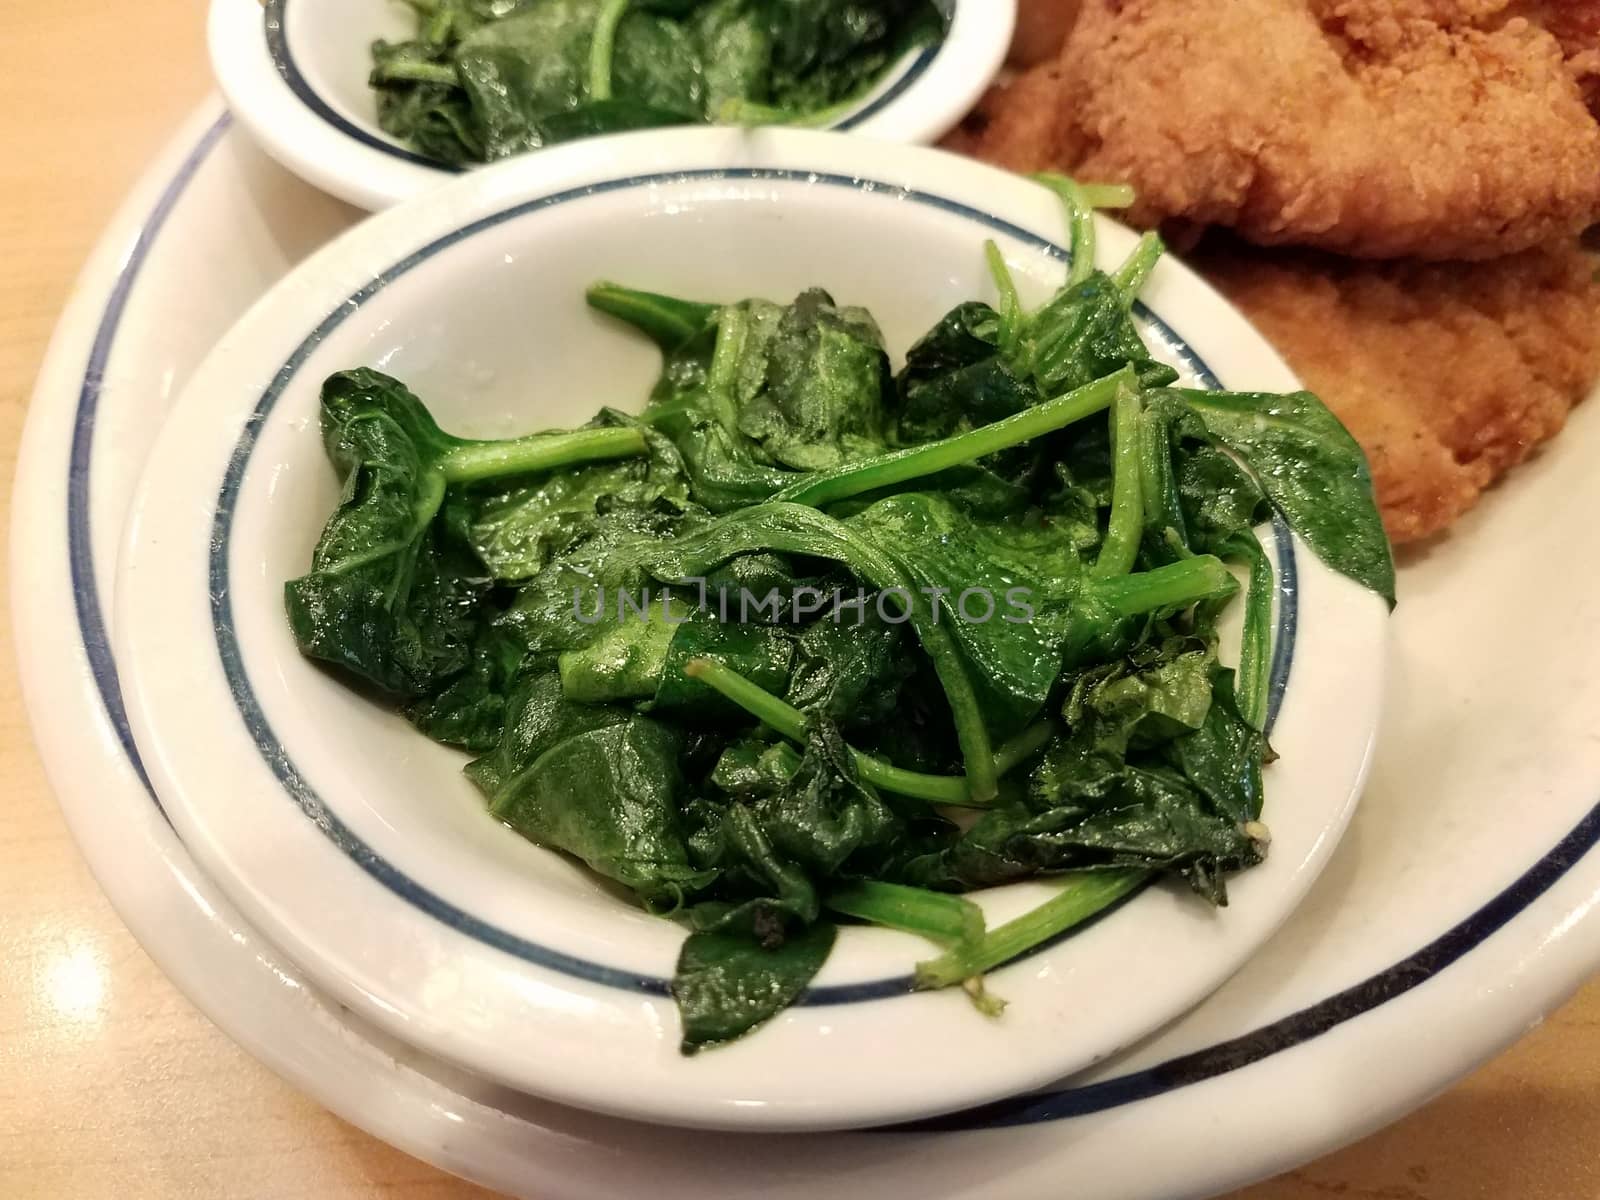 green spinach in bowl with fried chicken by stockphotofan1